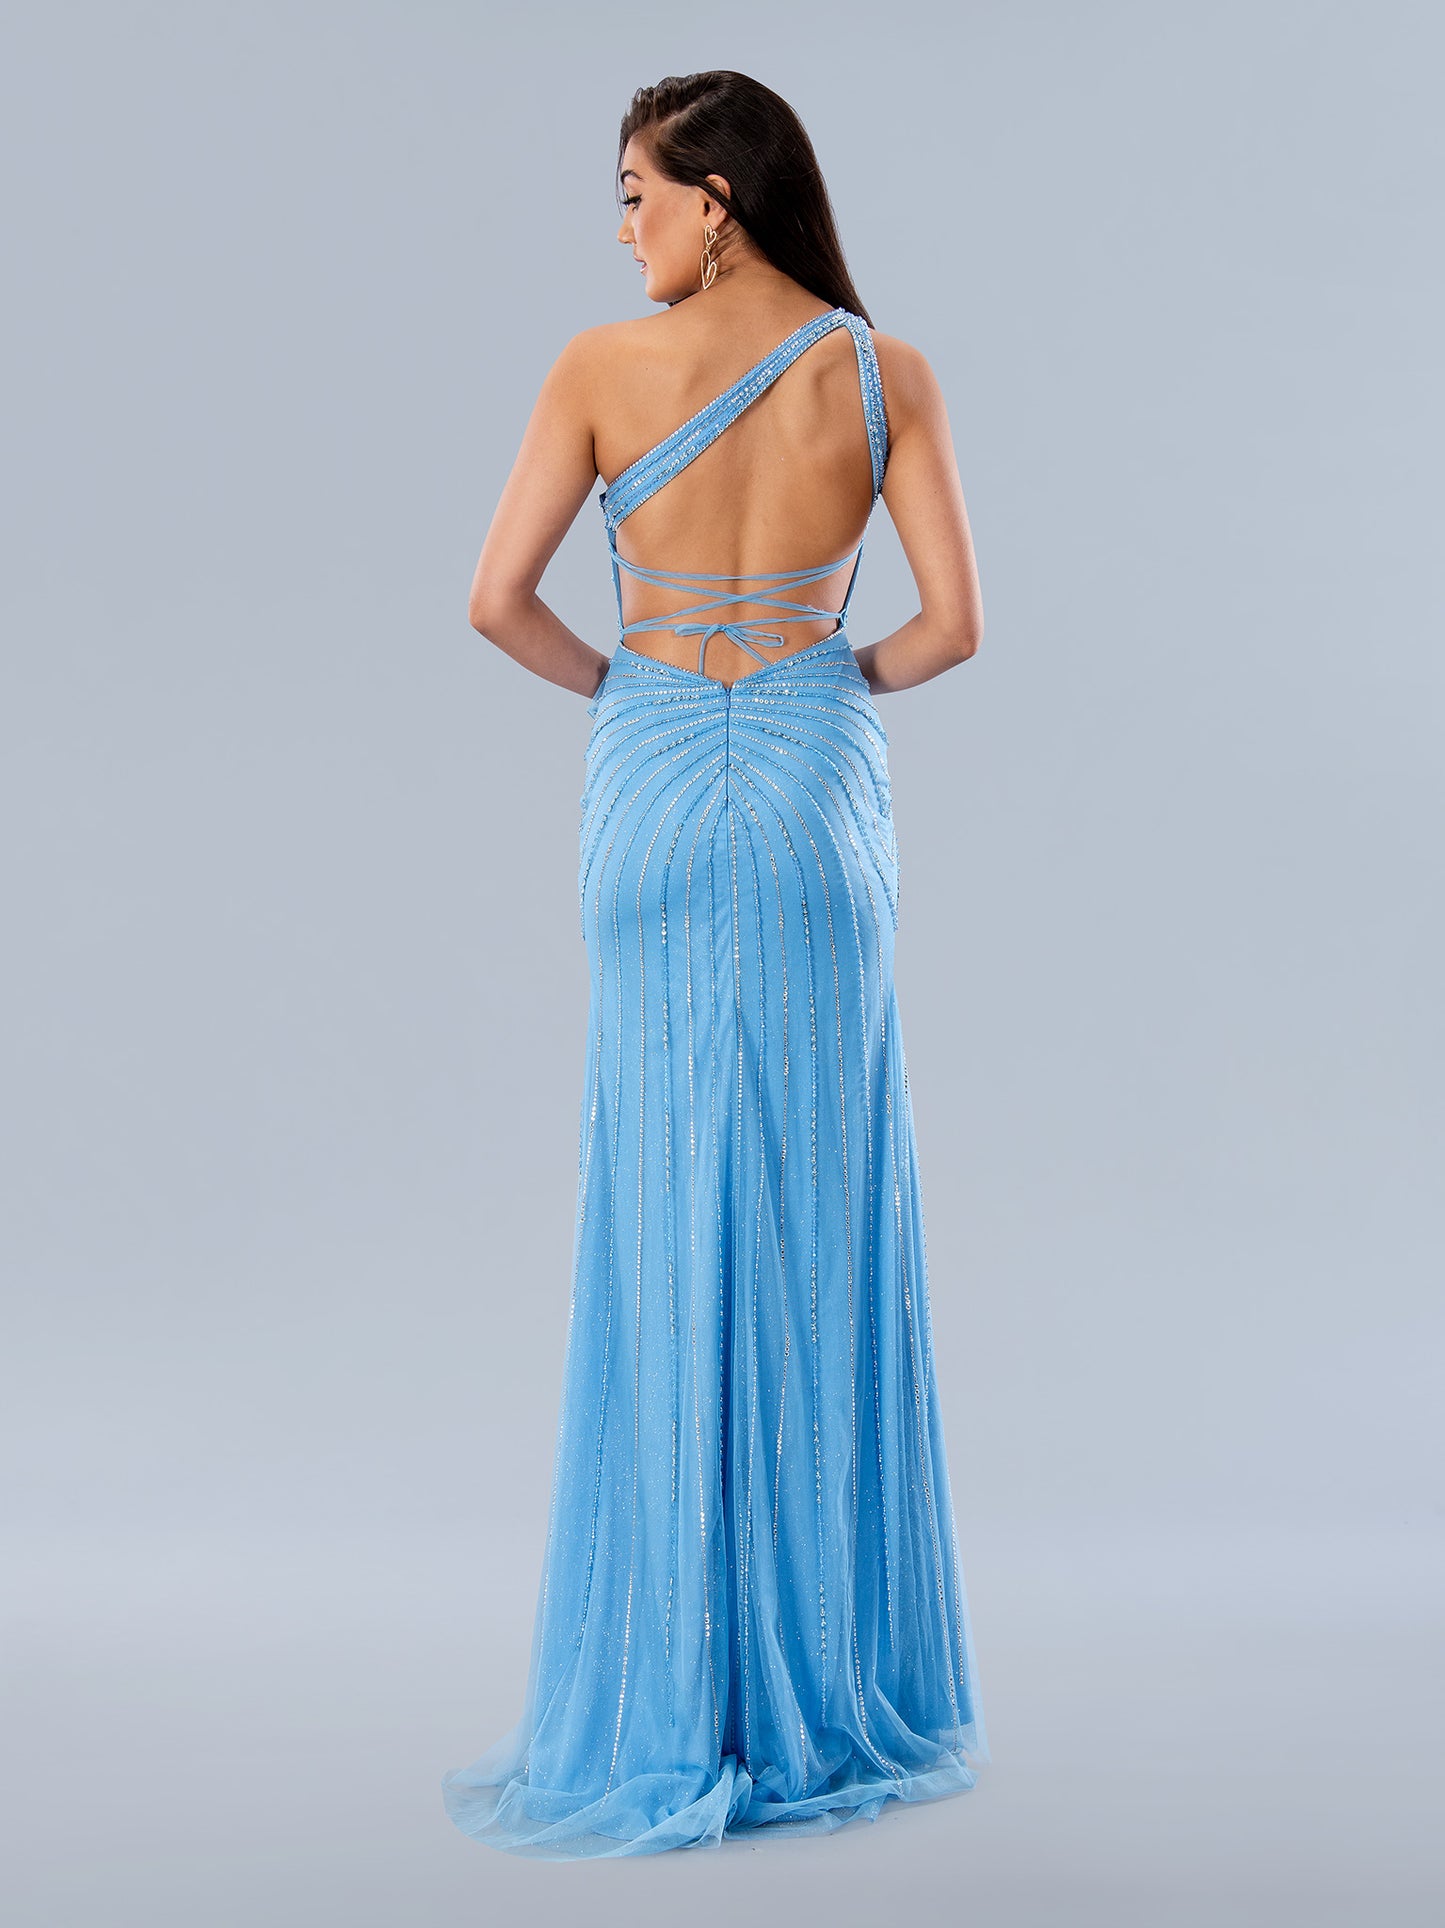 Stella Couture's 24246 Beaded One Shoulder Dress exudes timeless elegance with a modern twist. This sophisticatedly designed item features a ruffle waistline slit, an asymmetrically beaded single shoulder, a low-scooped back with corset supports, and a graceful side slit. The perfect pick for formals and proms.  Sizes: 0-16  Colors: Black, Blue